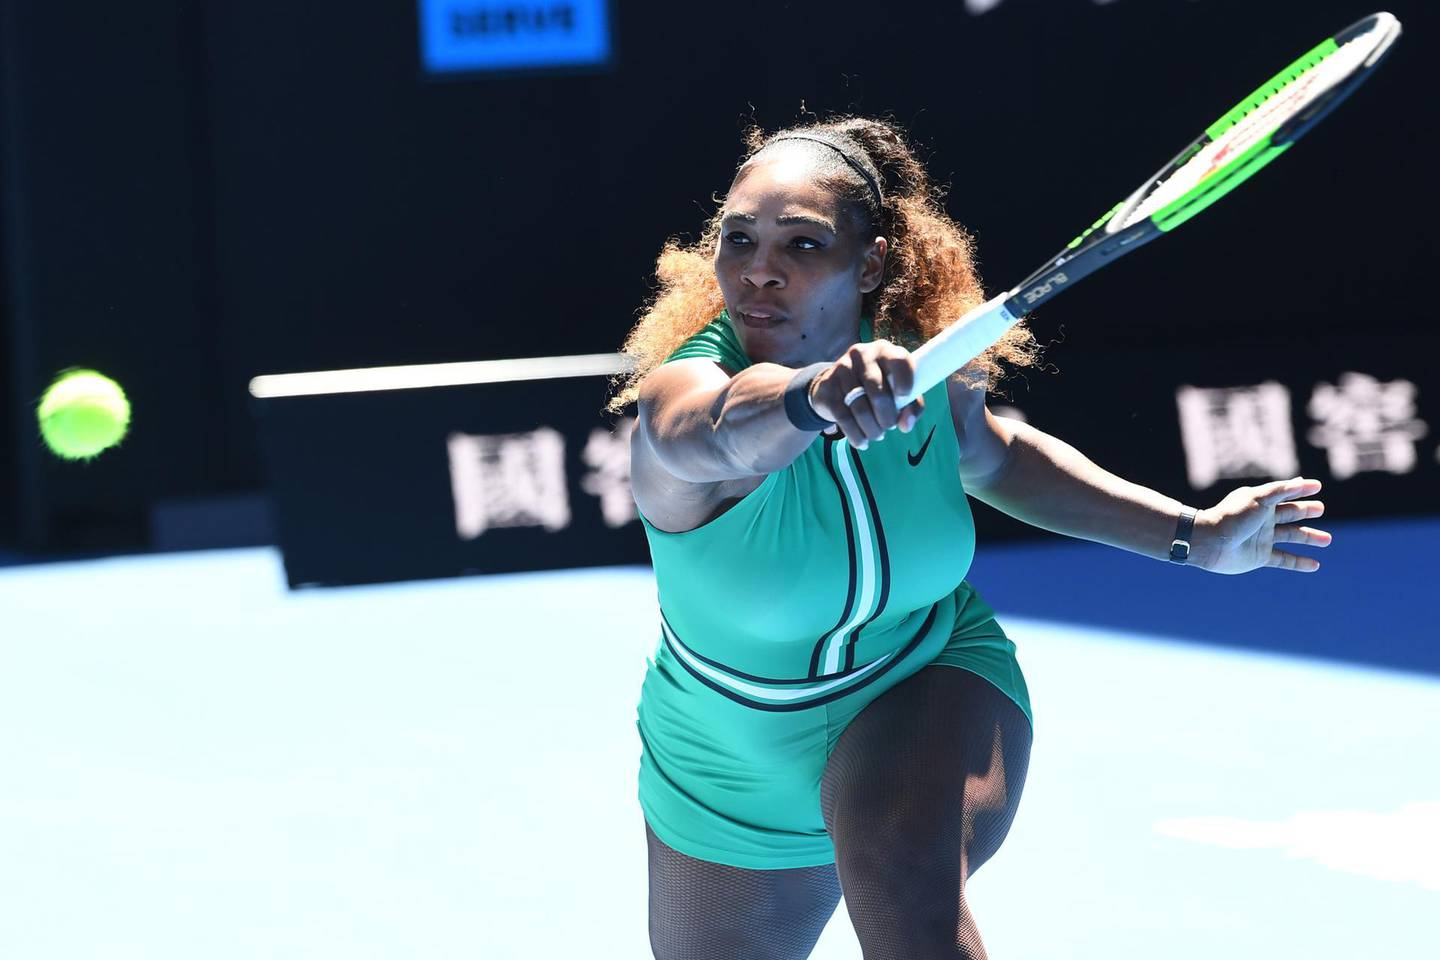 epa07298425 Serena Williams of the United States in action against Dayana Yastremska of the Ukraine on day six of the Australian Open Grand Slam tennis tournament in Melbourne, Australia, 19 January 2019.  EPA/JULIAN SMITH  AUSTRALIA AND NEW ZEALAND OUT